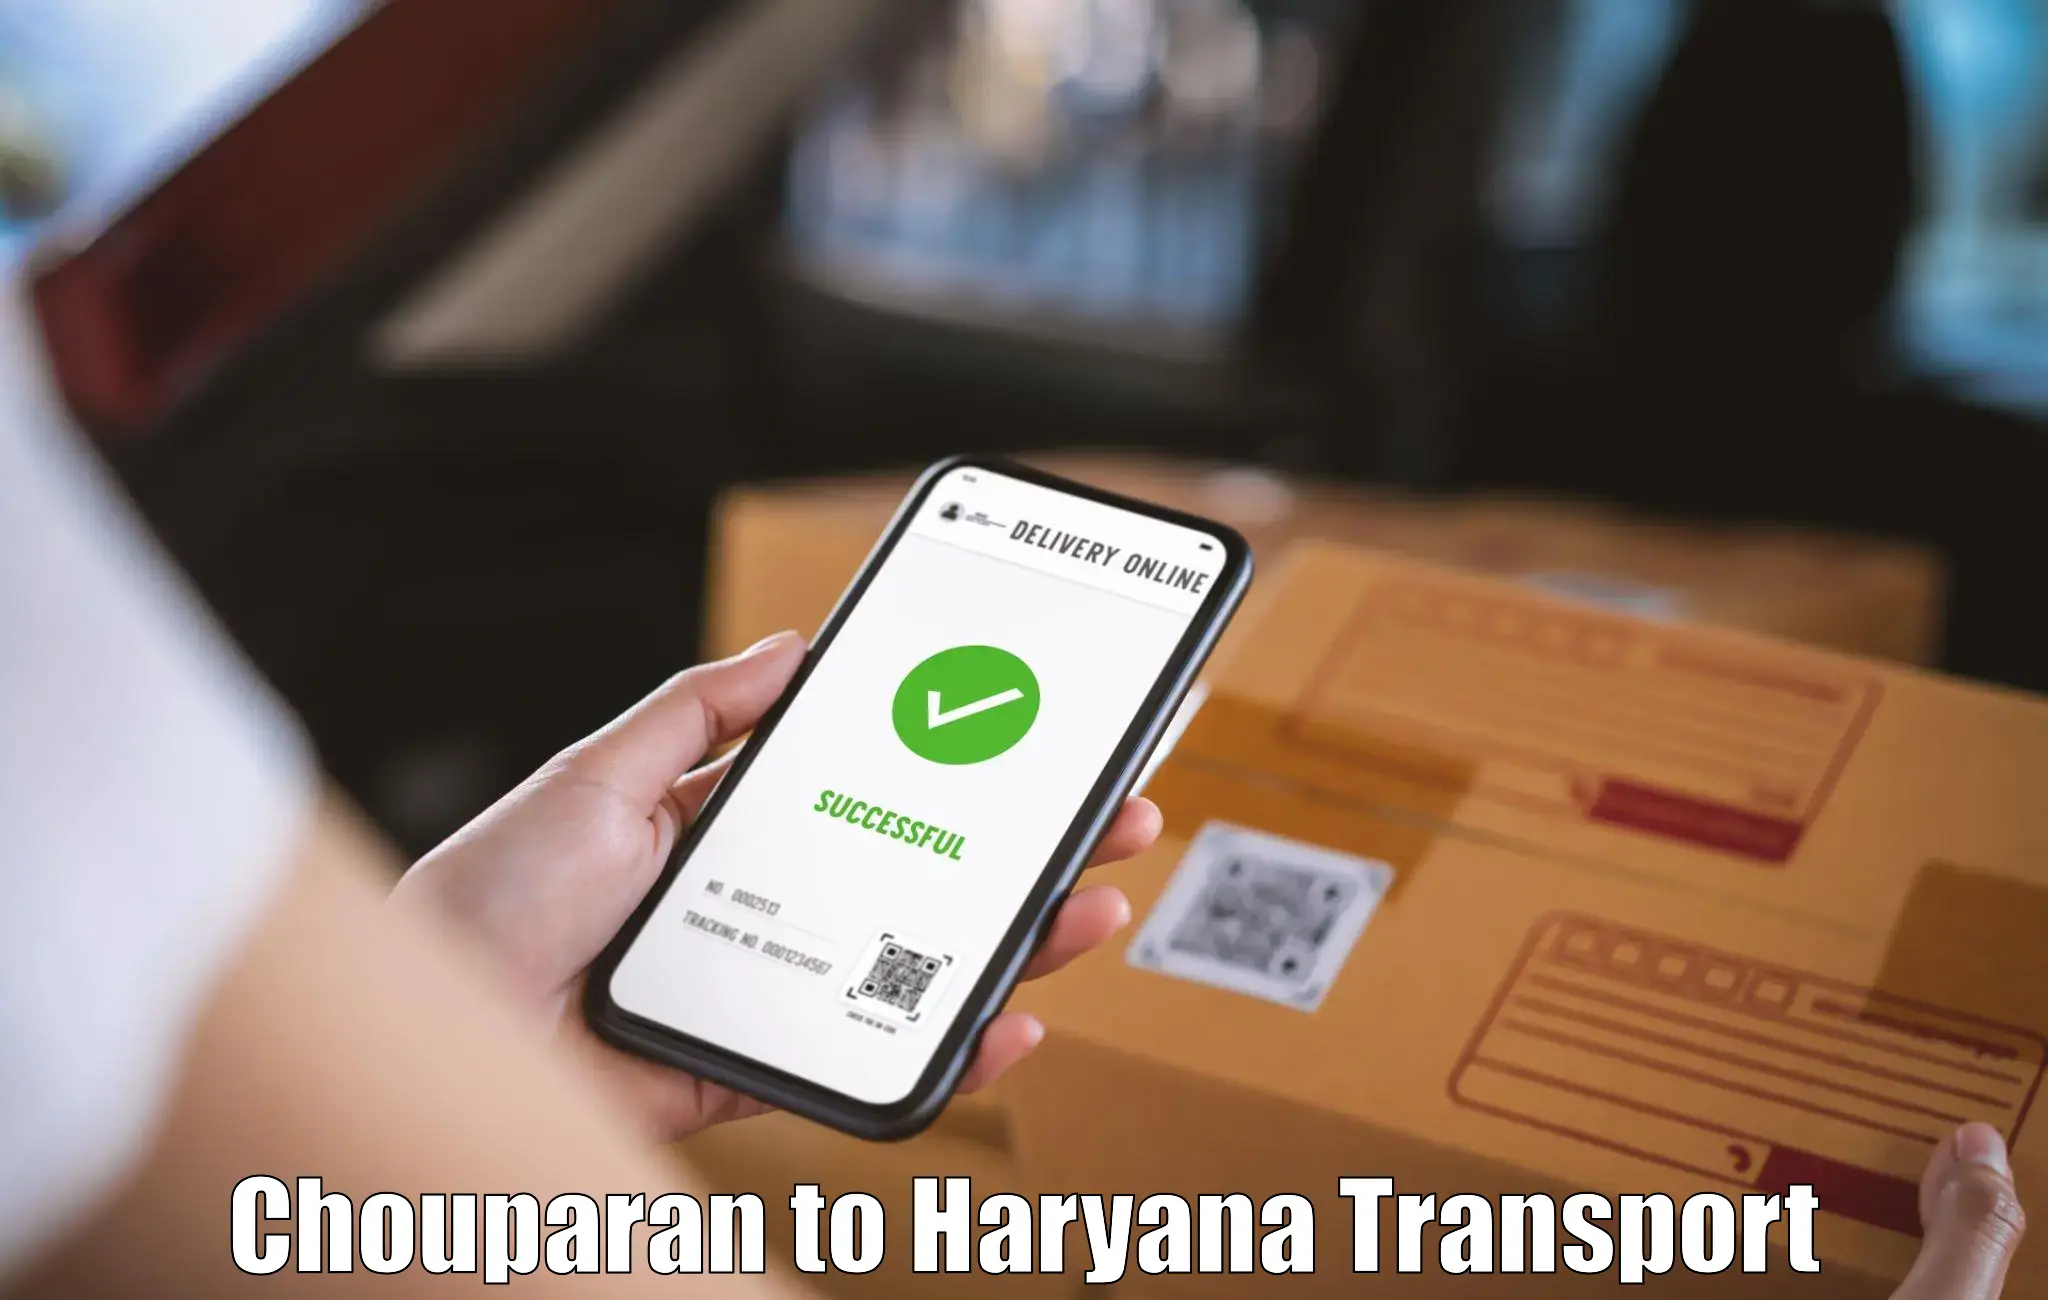 Package delivery services Chouparan to Gurgaon